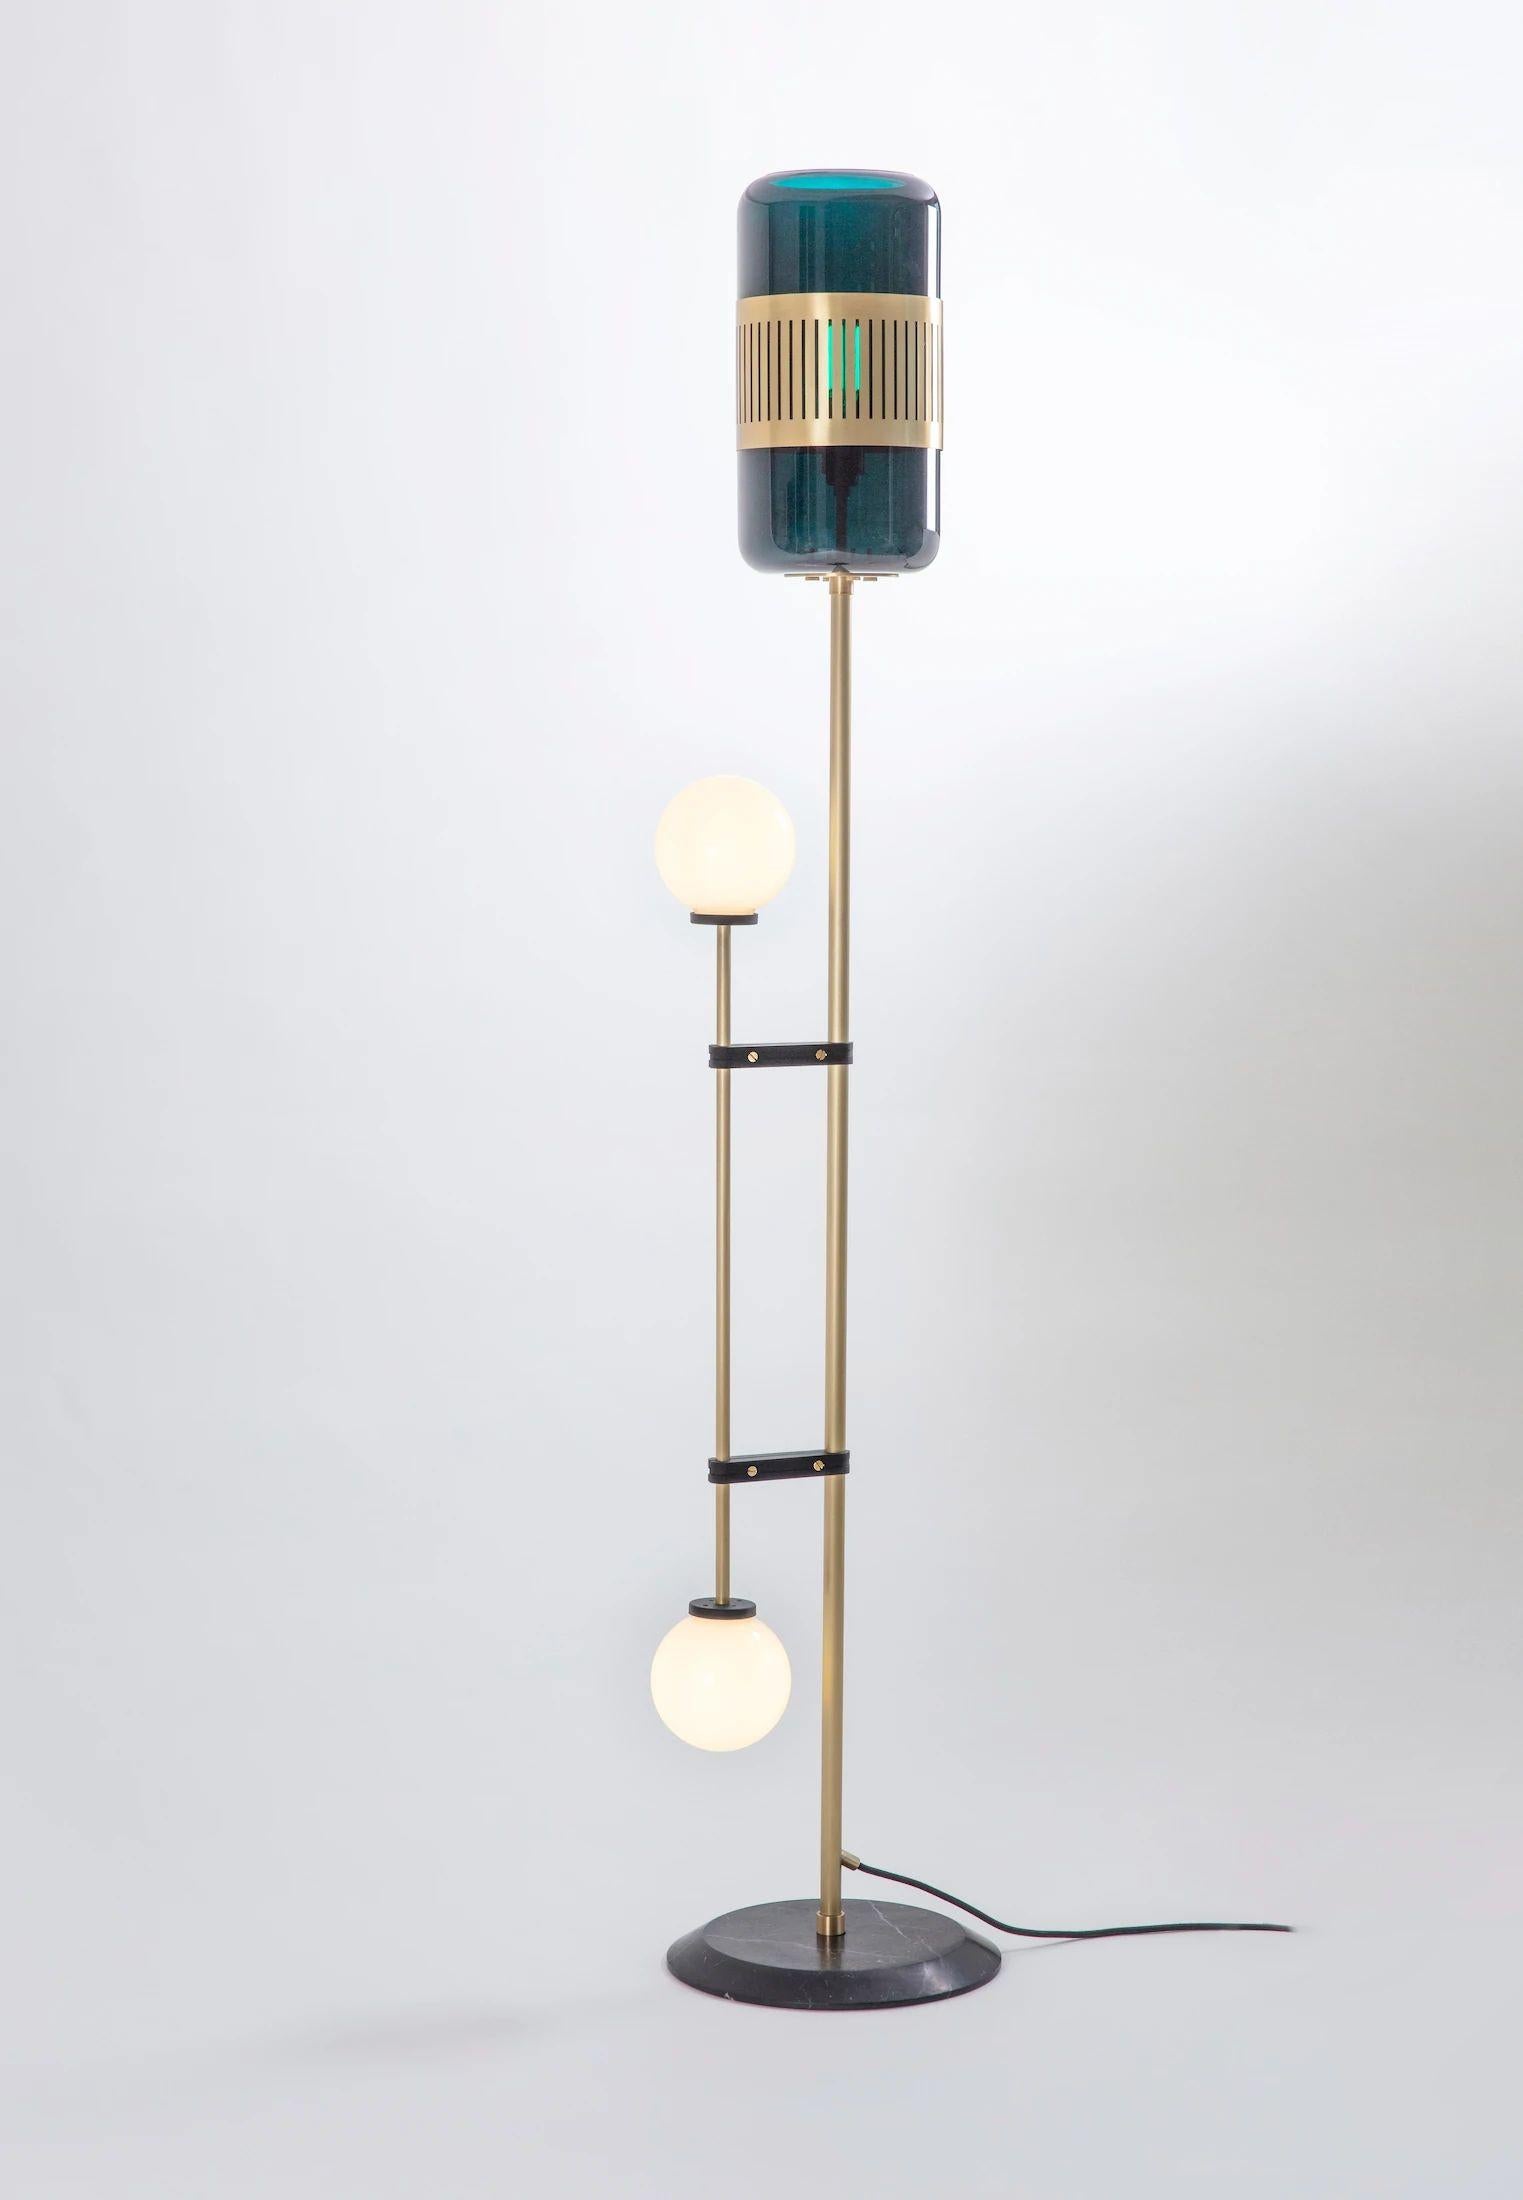 Amber glass lizak floor lamp by Bert Frank
Dimensions: 30 x 30 x 159 cm
Materials: brass and glass

Available finishes: brass, opal and blue
All our lamps can be wired according to each country. If sold to the USA it will be wired for the USA